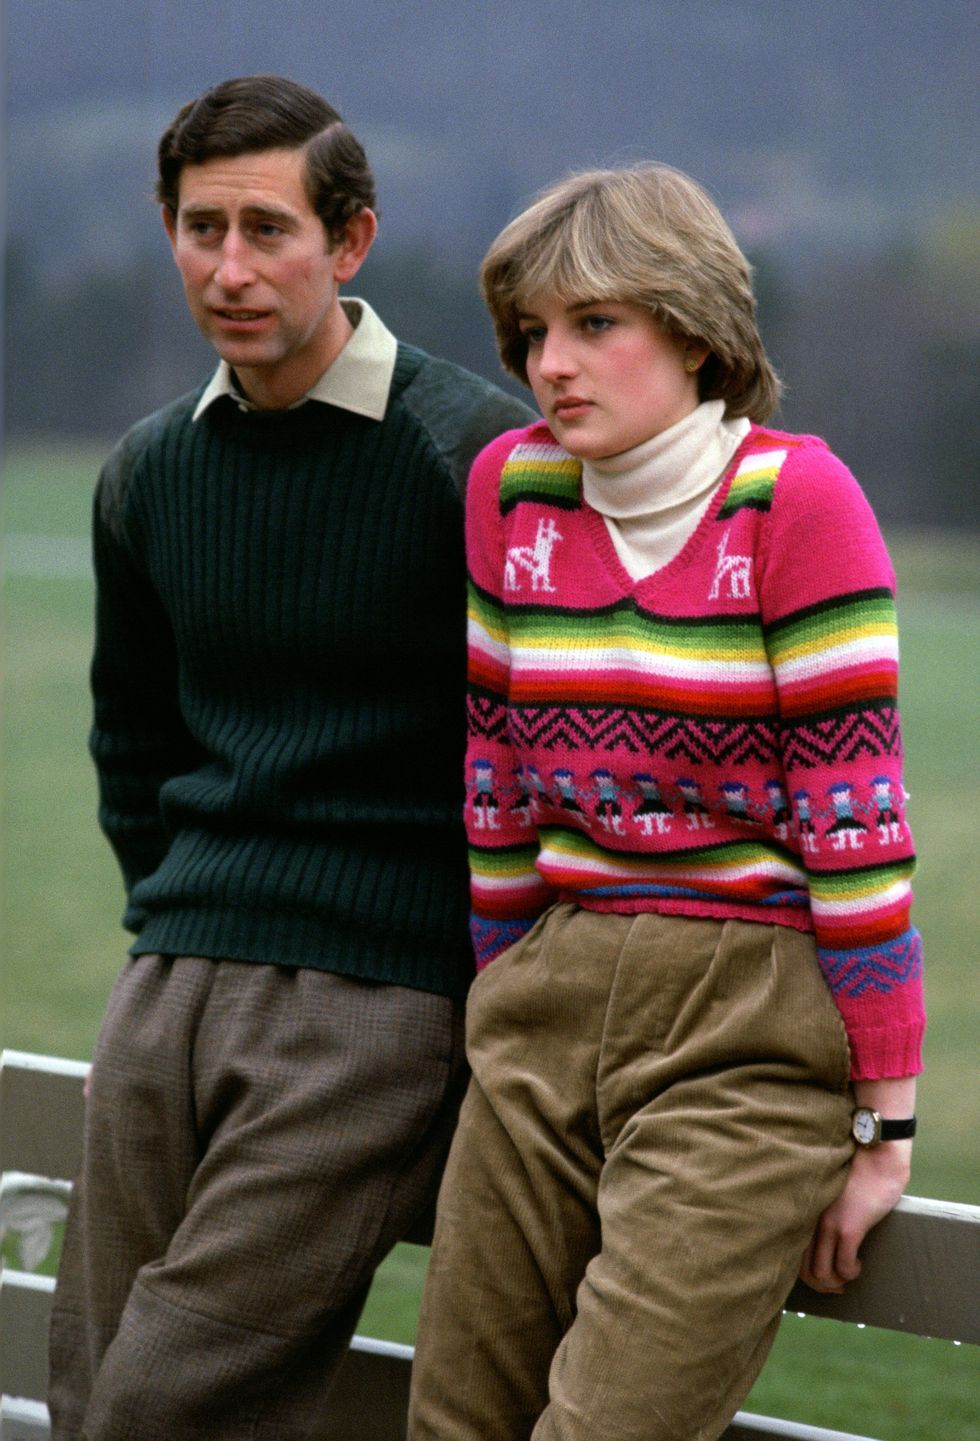 united kingdom   may 06  prince charles, prince of wales with his fiance lady diana spencer during a photocall before their wedding while staying at craigowan lodge on the balmoral estate in scotland  photo by tim graham photo library via getty images